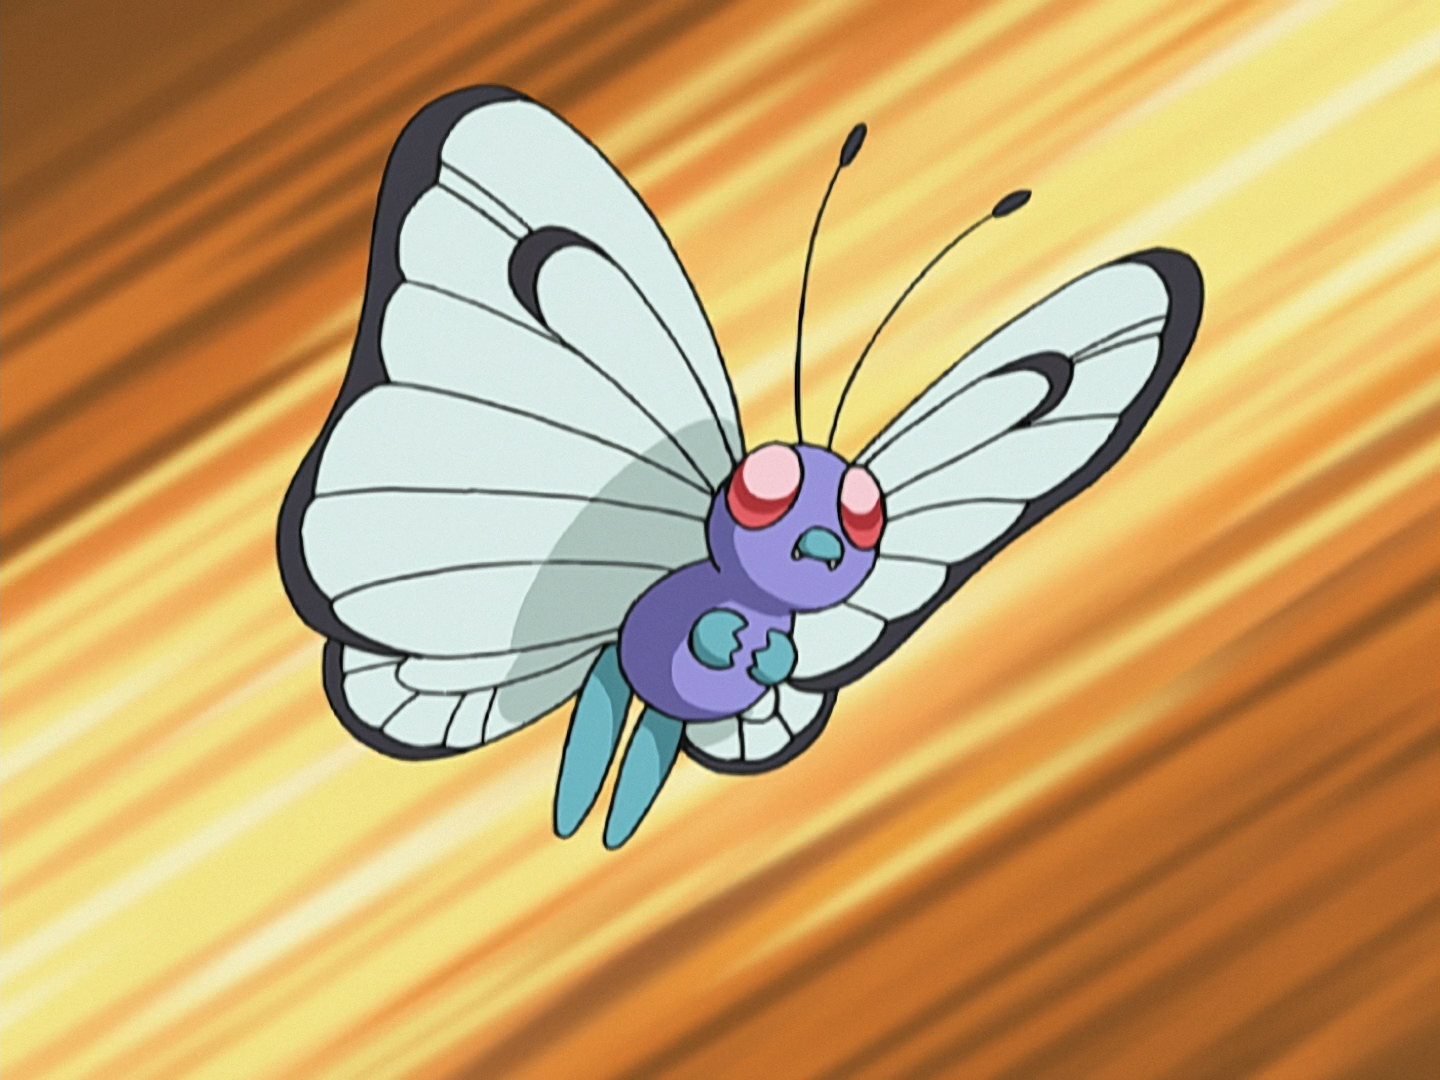 Pokemon Best Wishes 2 Episode Reviews - Ep. 46 *Bye Bye Butterfree Part 2*  - YouTube